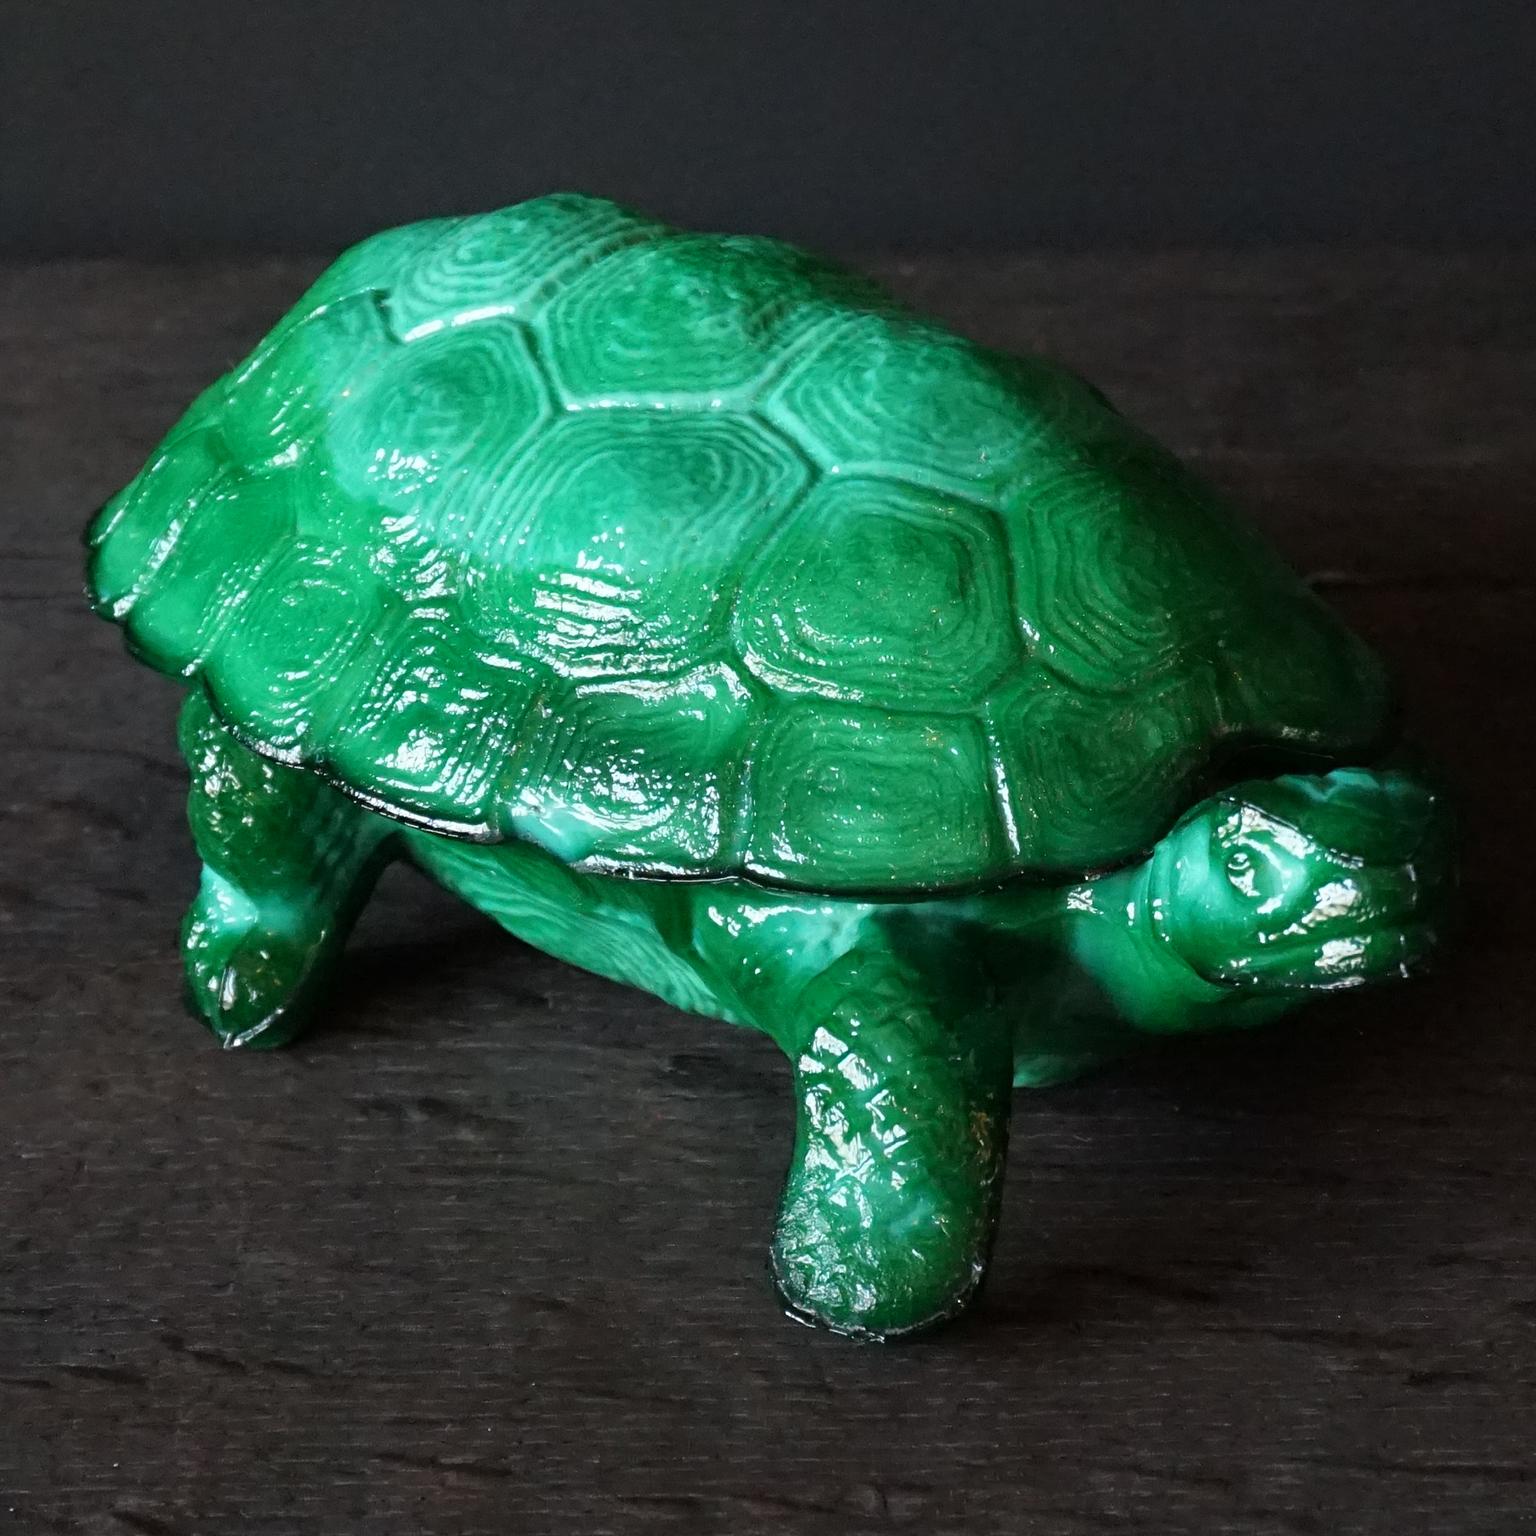 A lovely 1930s Art Deco Czech Republic made malachite glass turtle trinket dish, by Curt Schlevogt designed by Mario Petrucci

Malachite glass is intended to look like malachite (a green copper carbonate mineral), or more generally, to look like